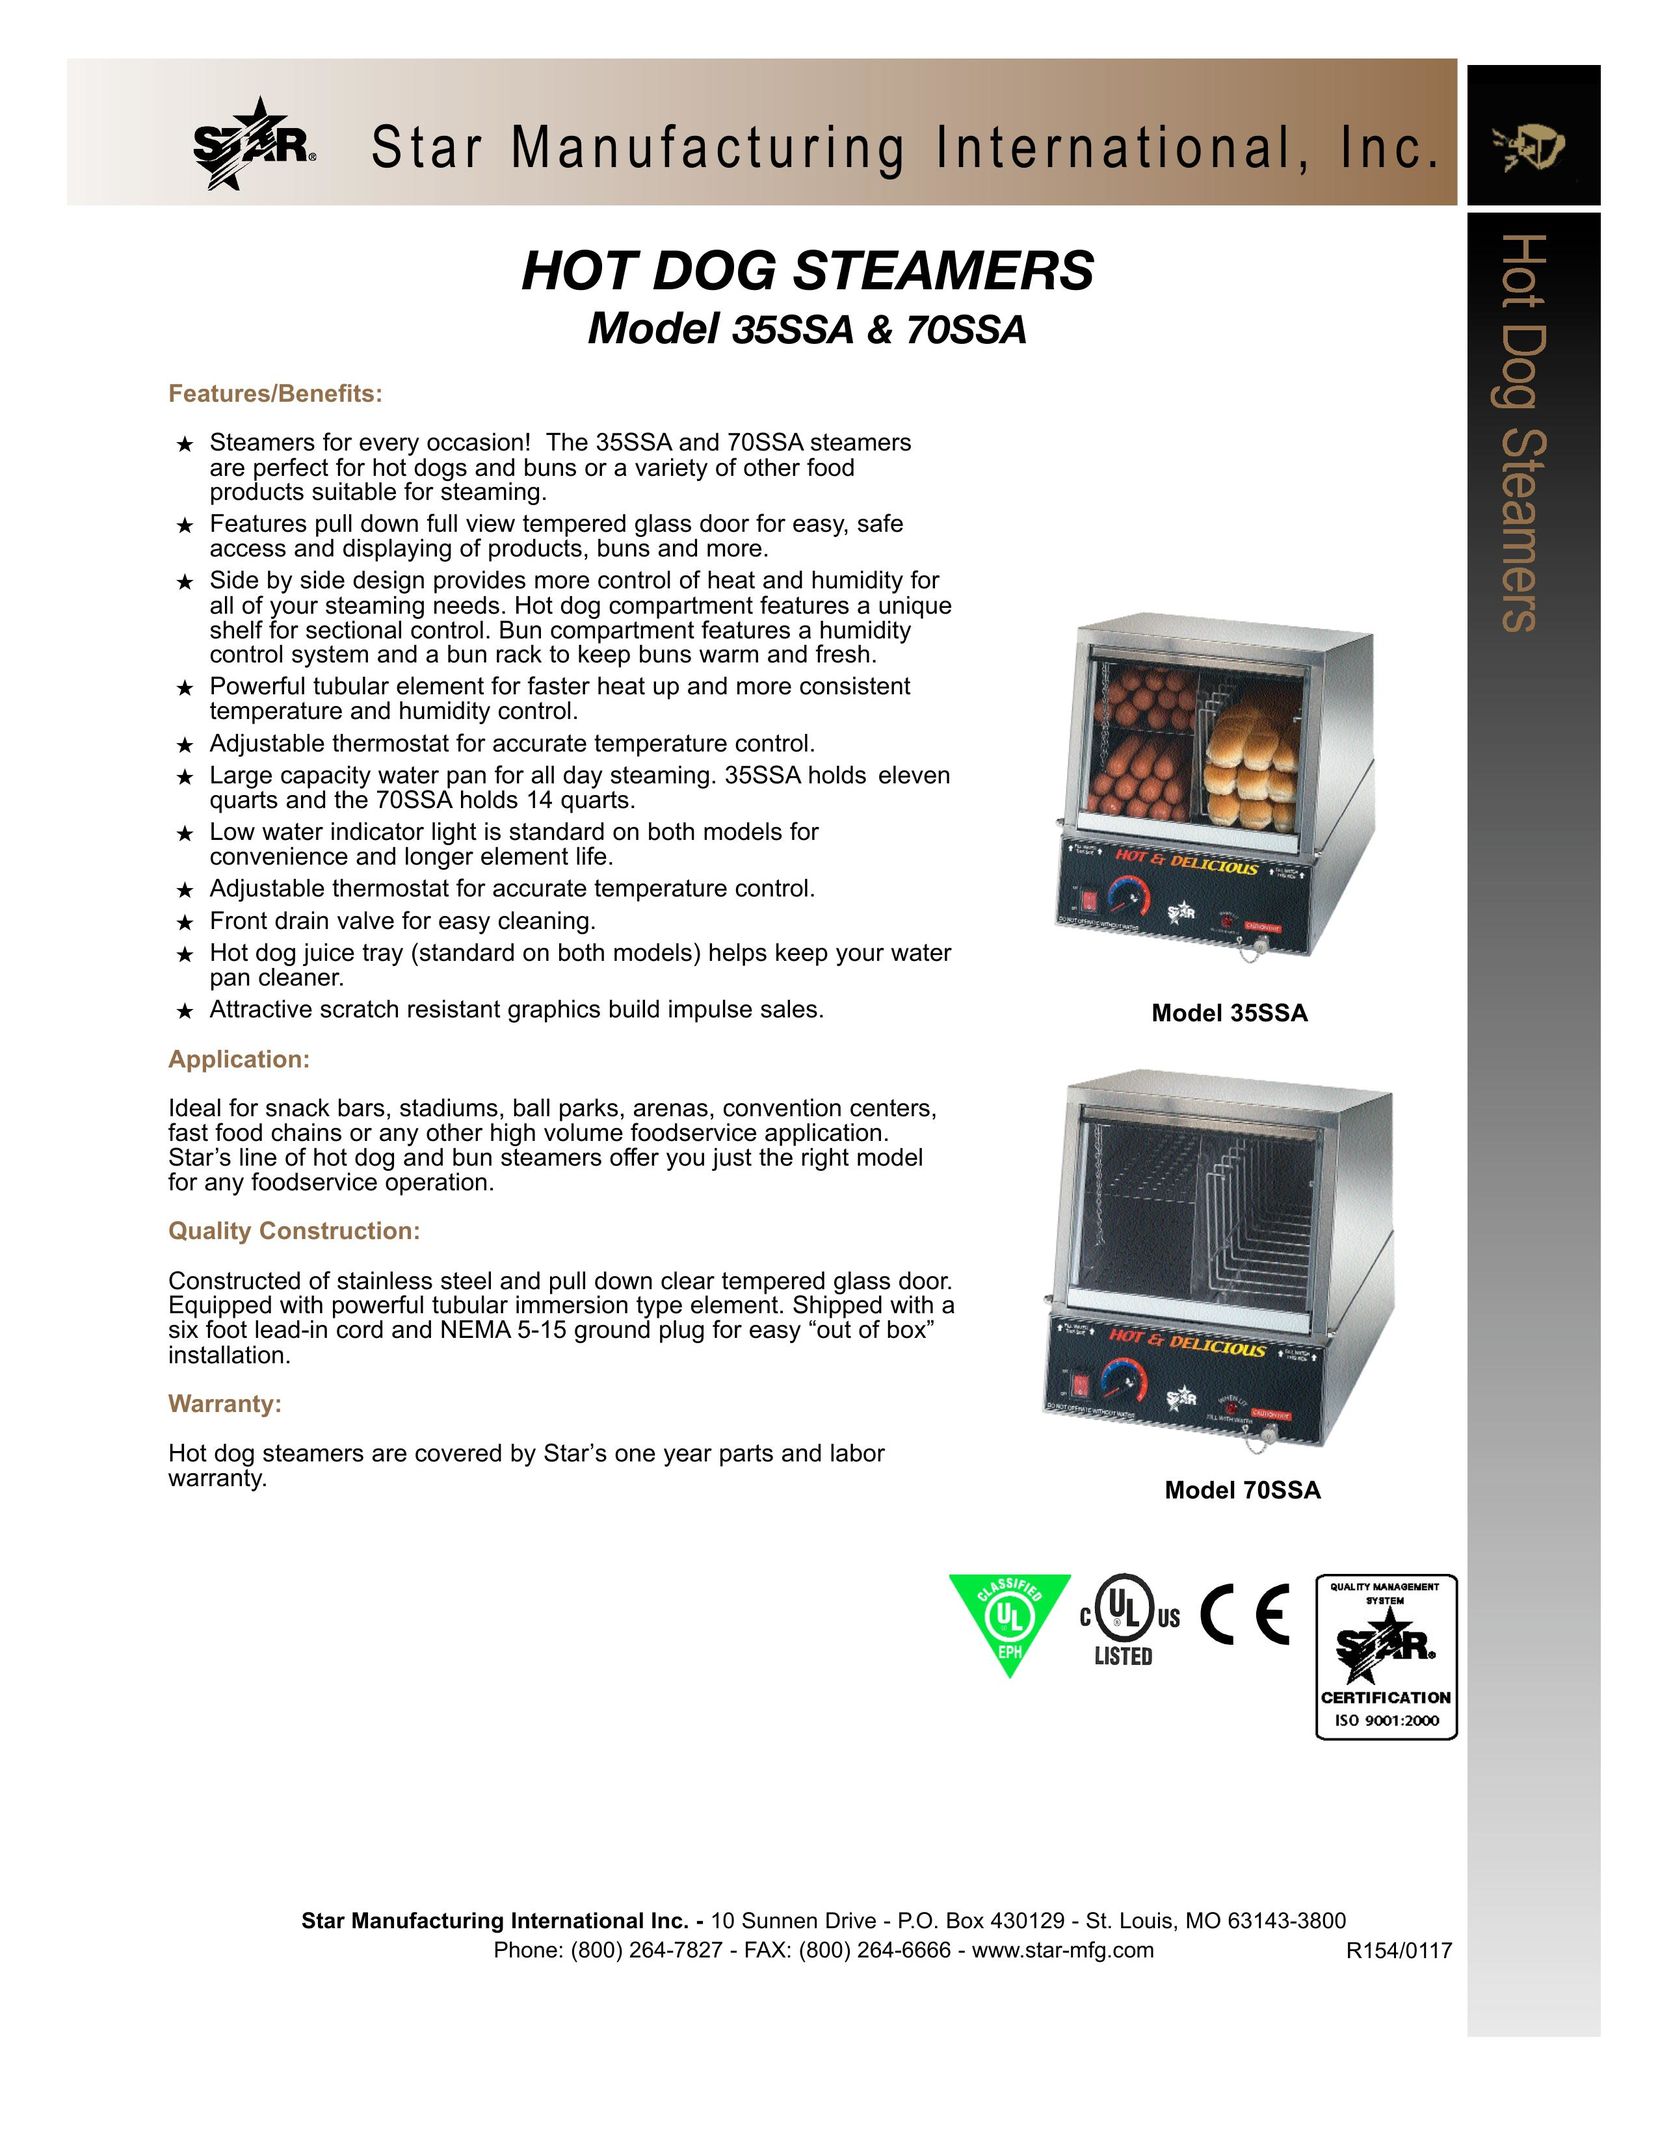 Star Manufacturing 70SSA Electric Steamer User Manual